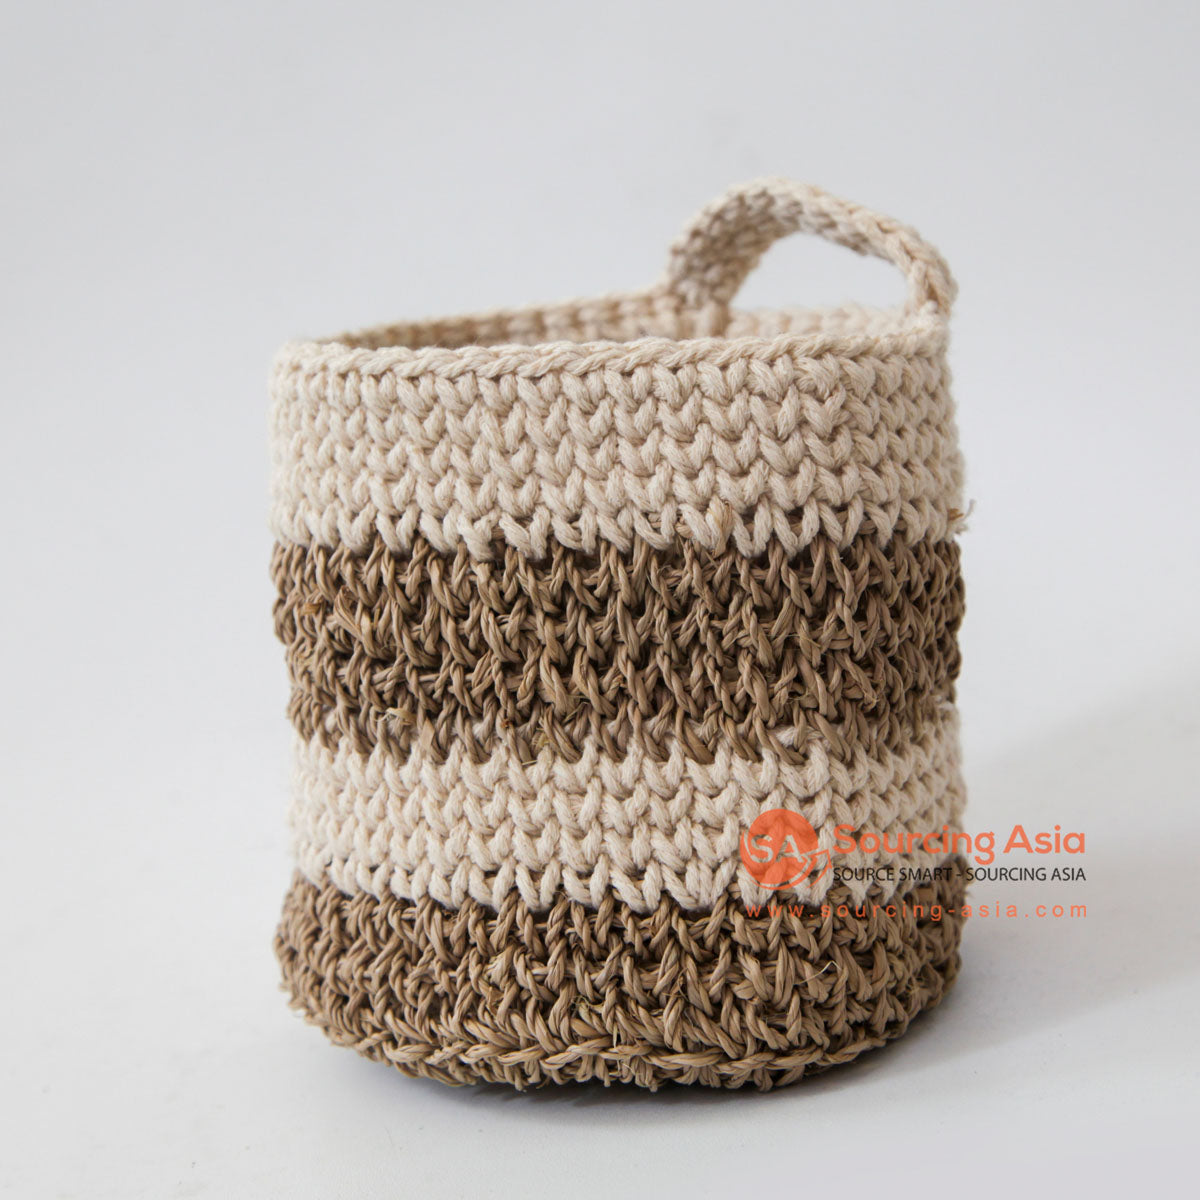 DHL132 MULTICOLOR MACRAME SMALL BASKET WITH HANDLE